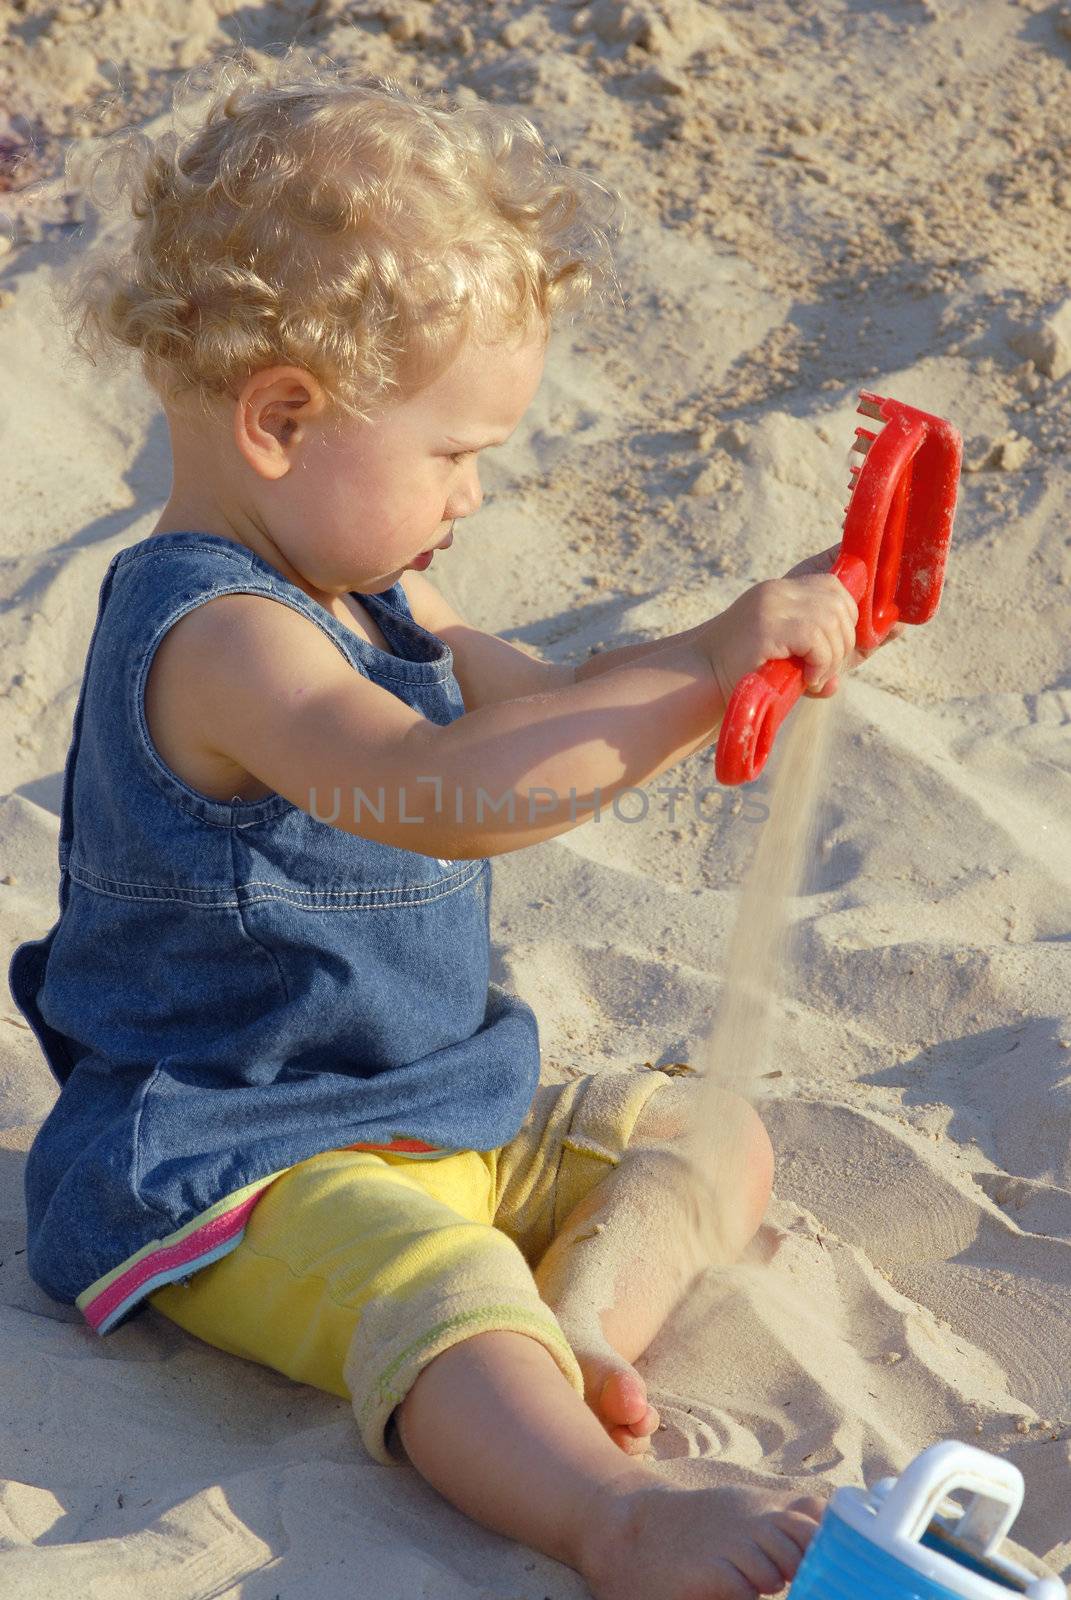 Baby girl playing on the beach with a red toy and sand. 